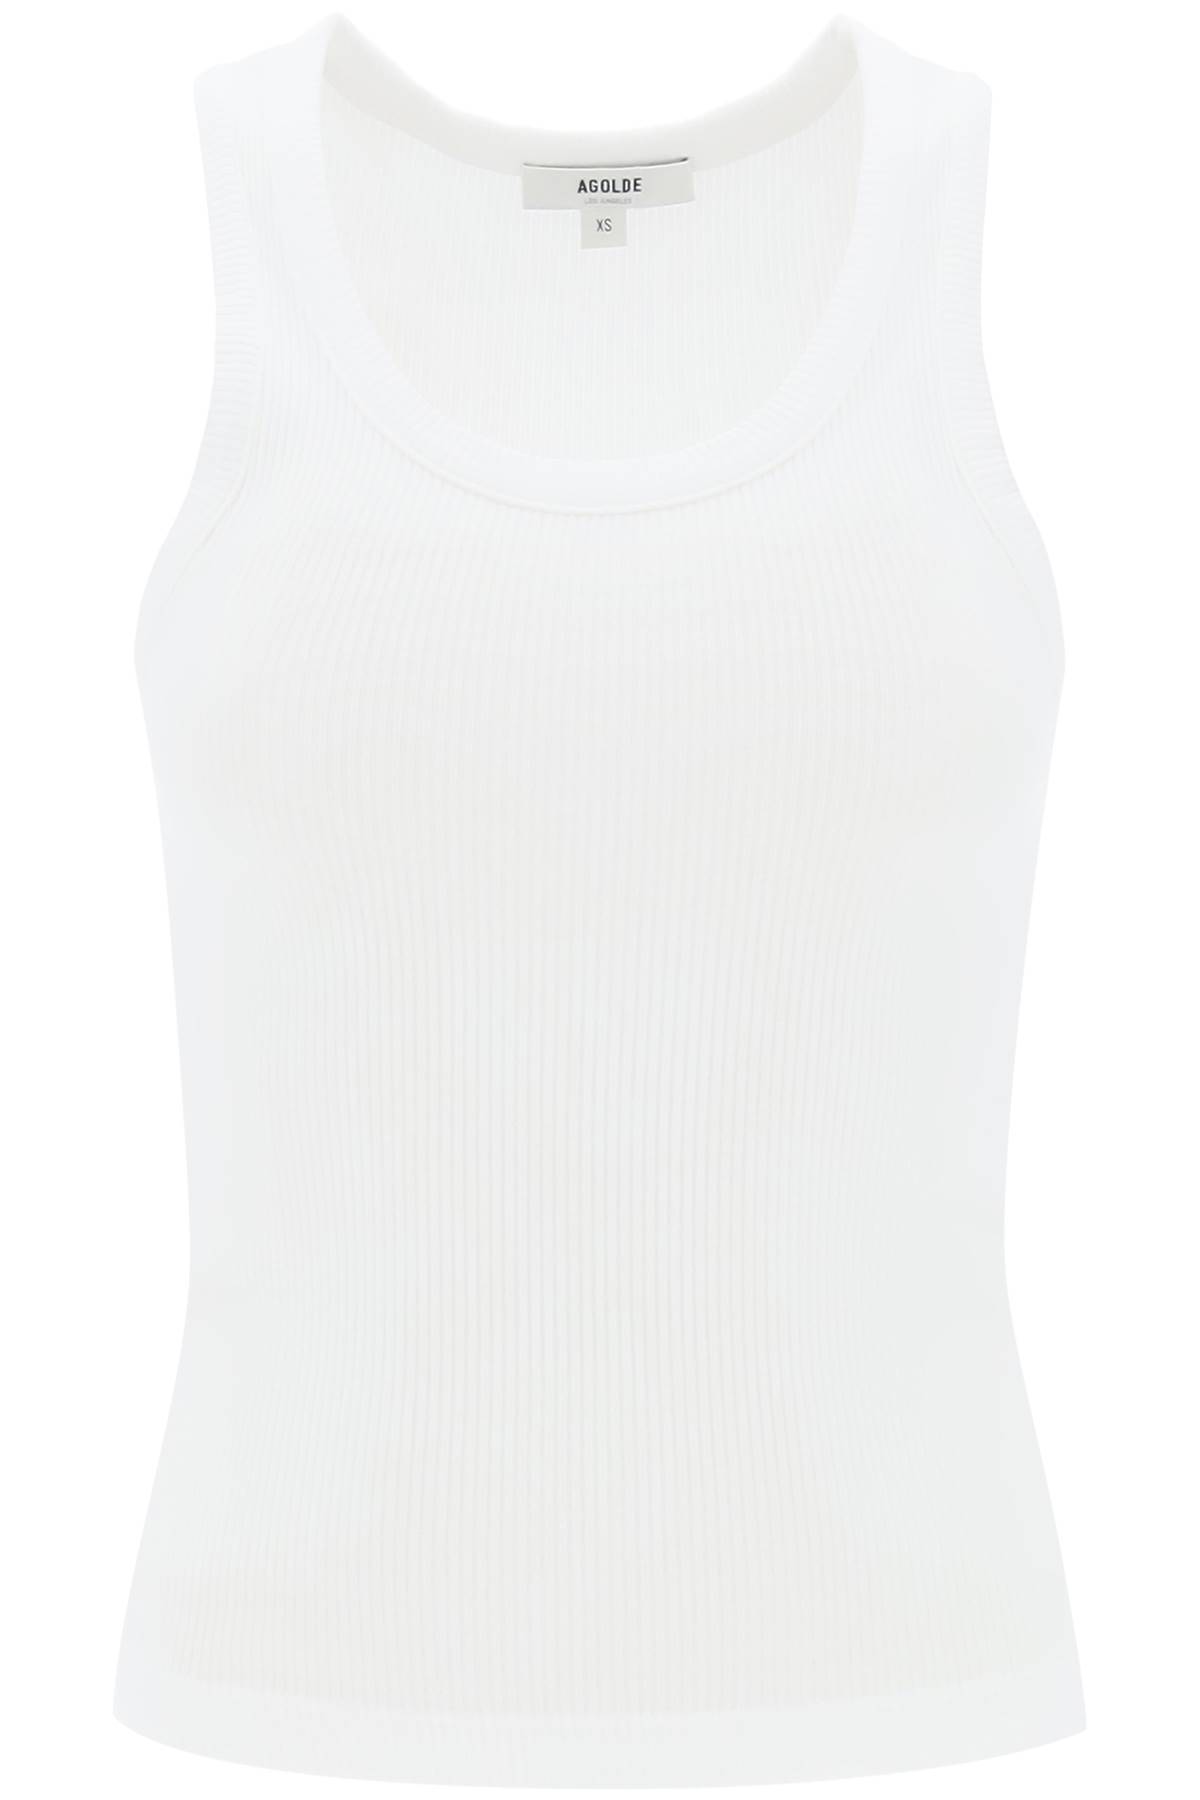 AGOLDE AGOLDE poppy ribbed tank top